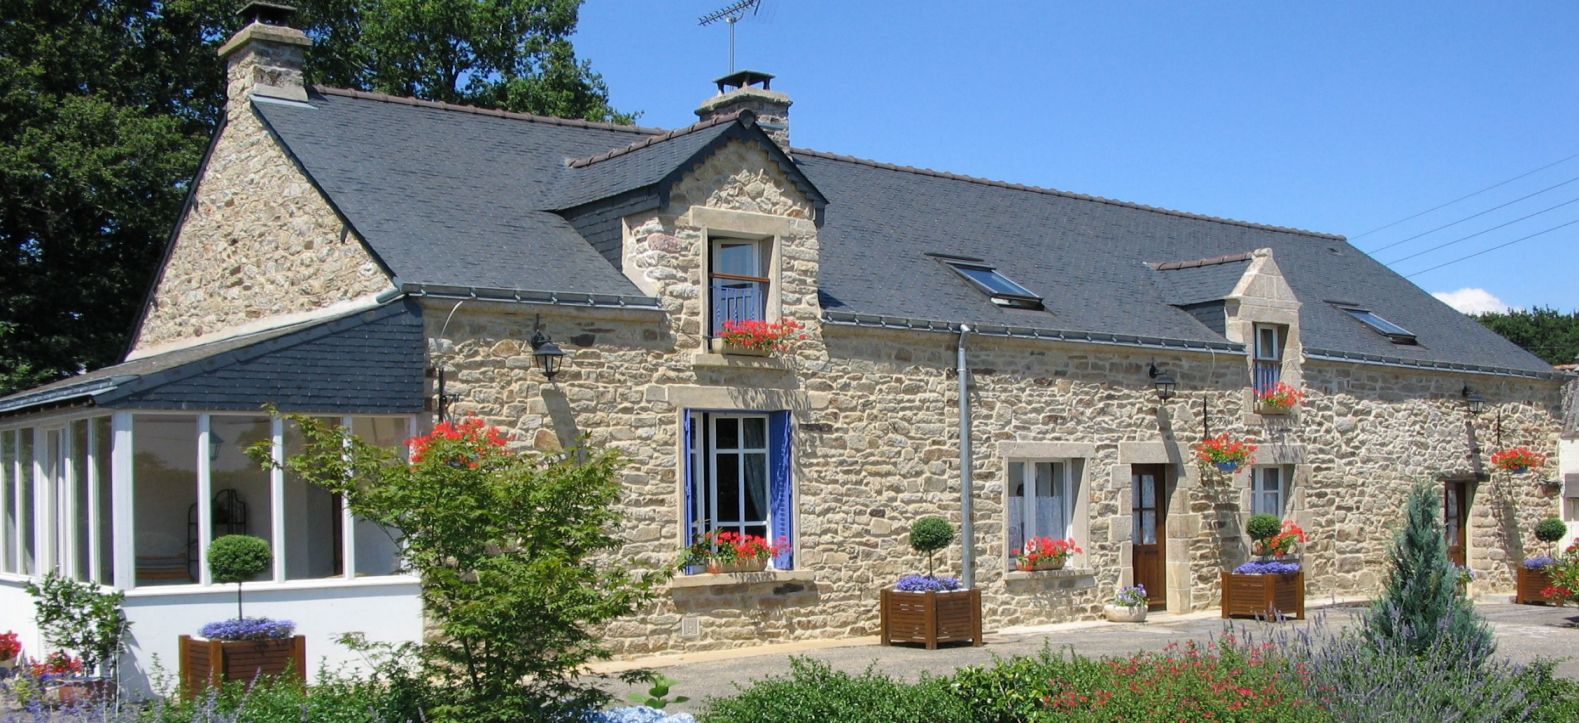 Brittany Holiday Cottages to let